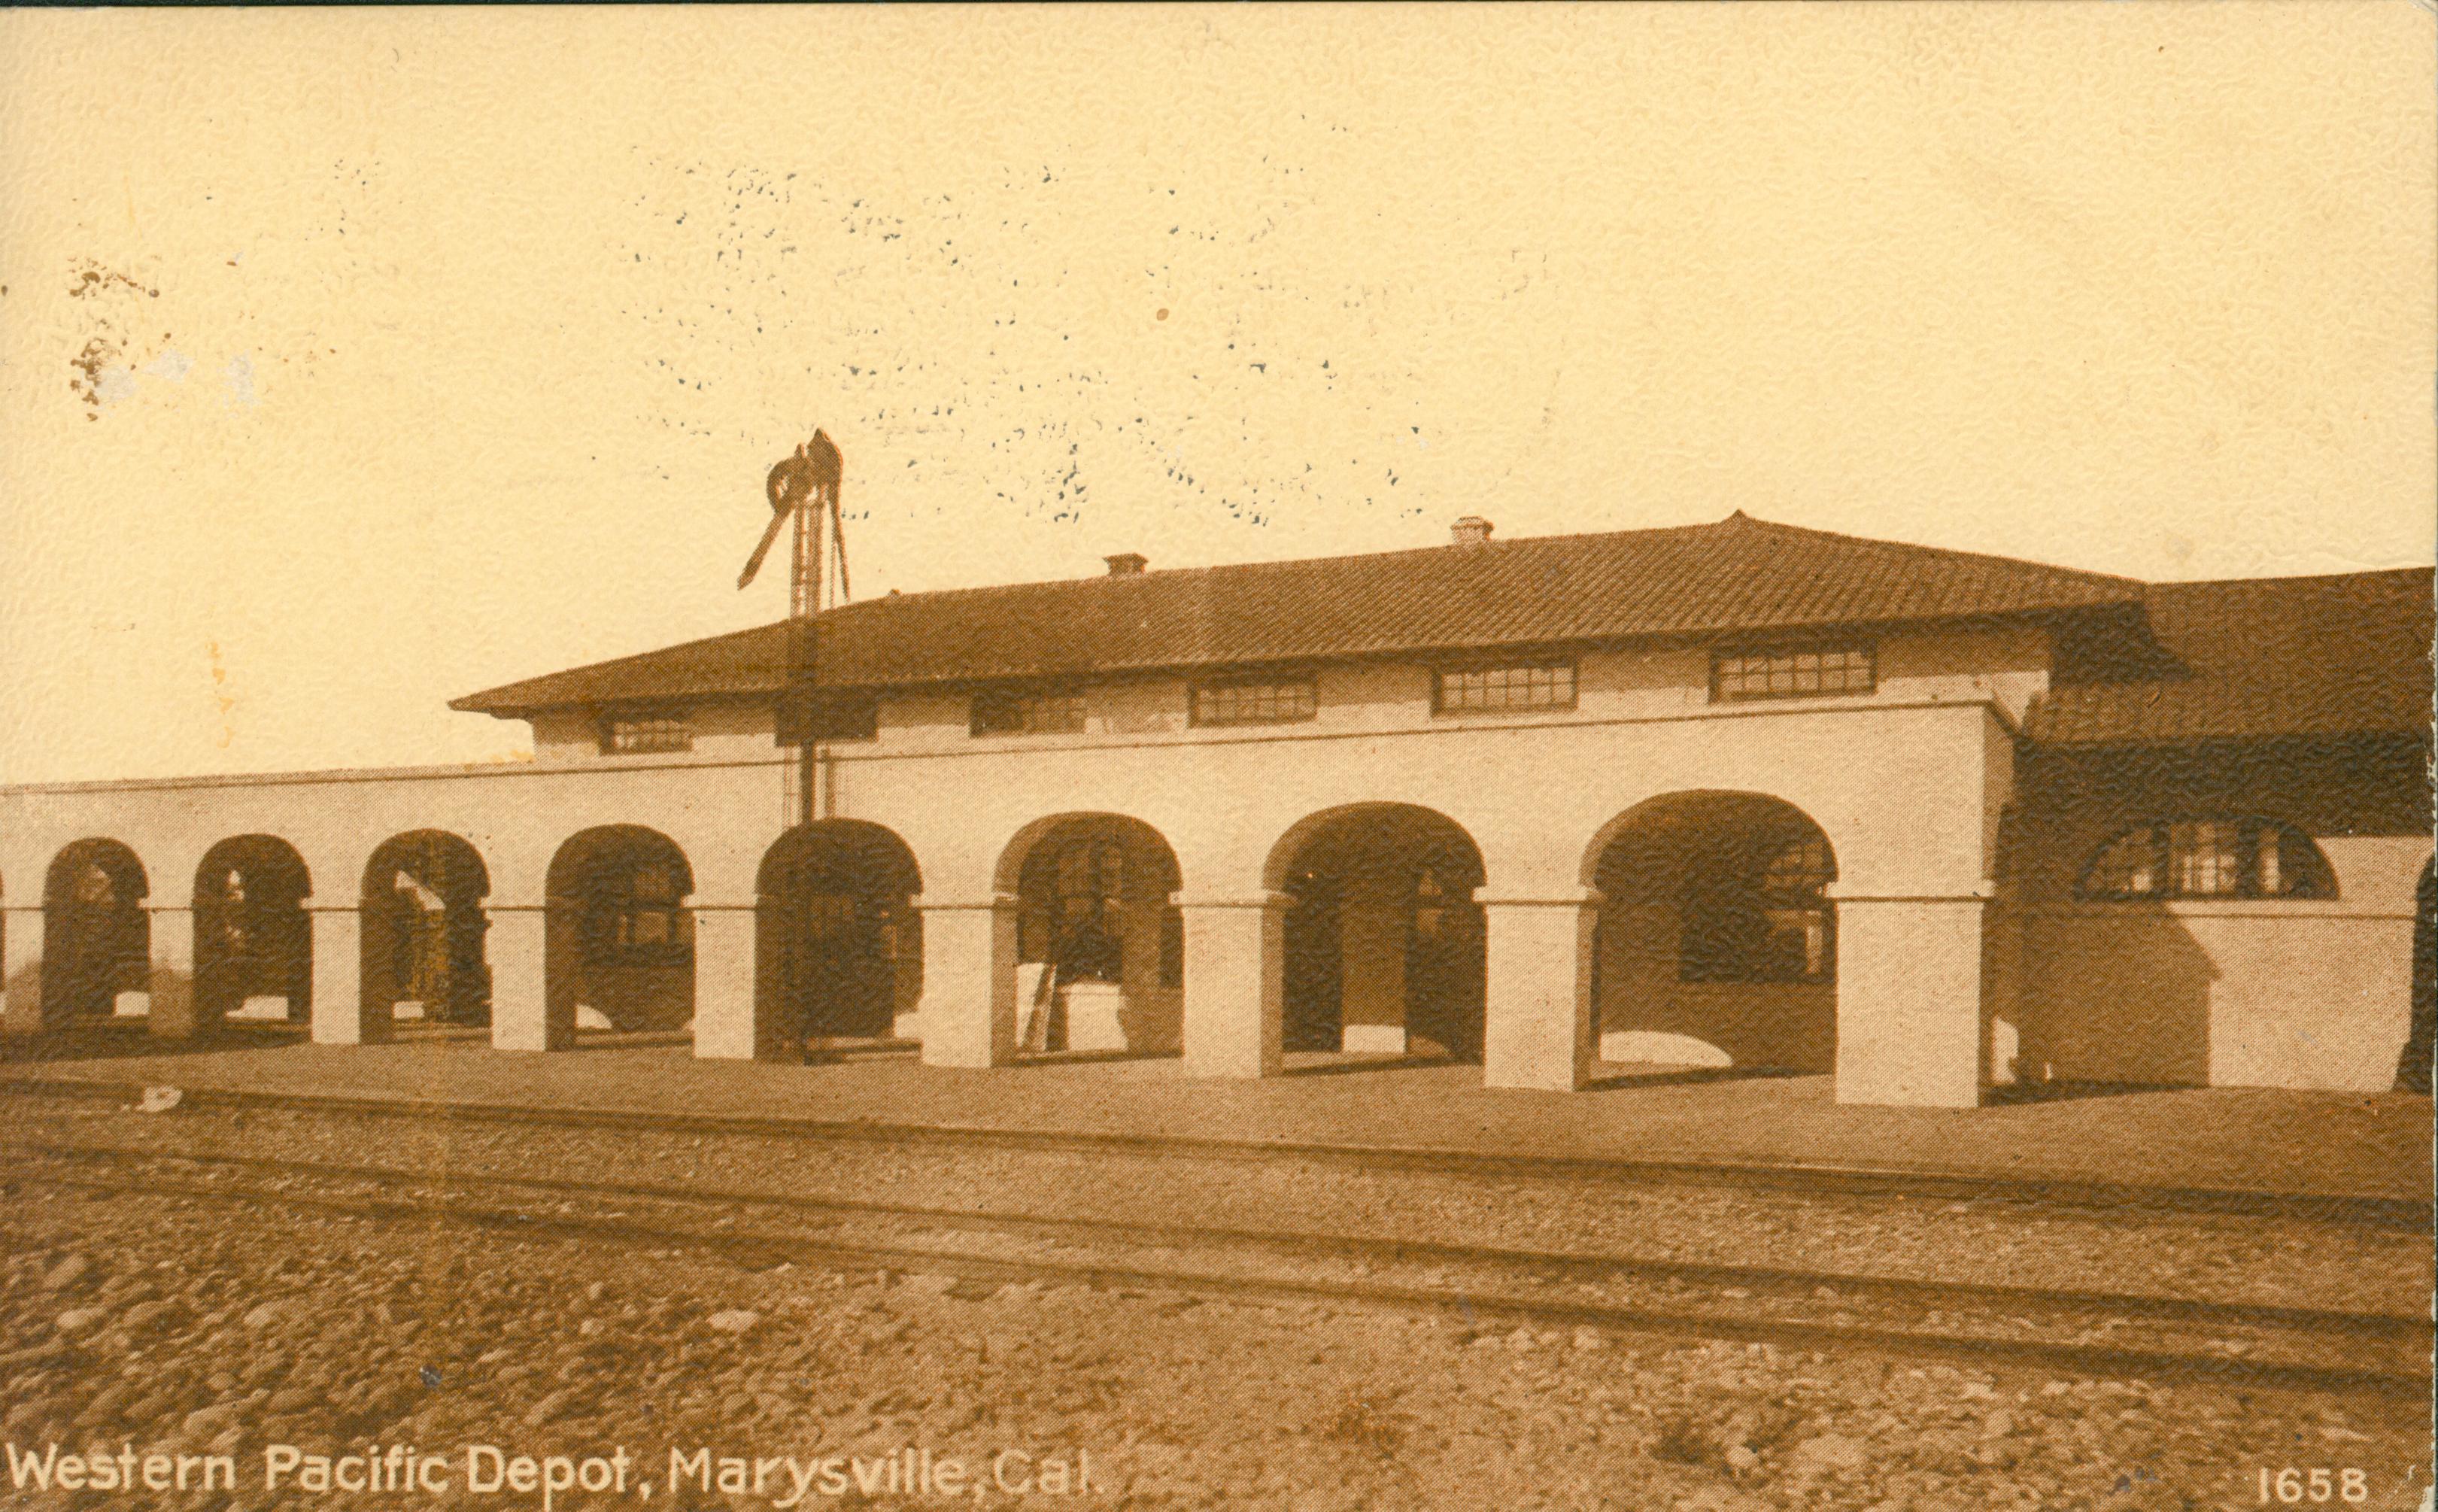 Shows the exterior of the Western Pacific train depot